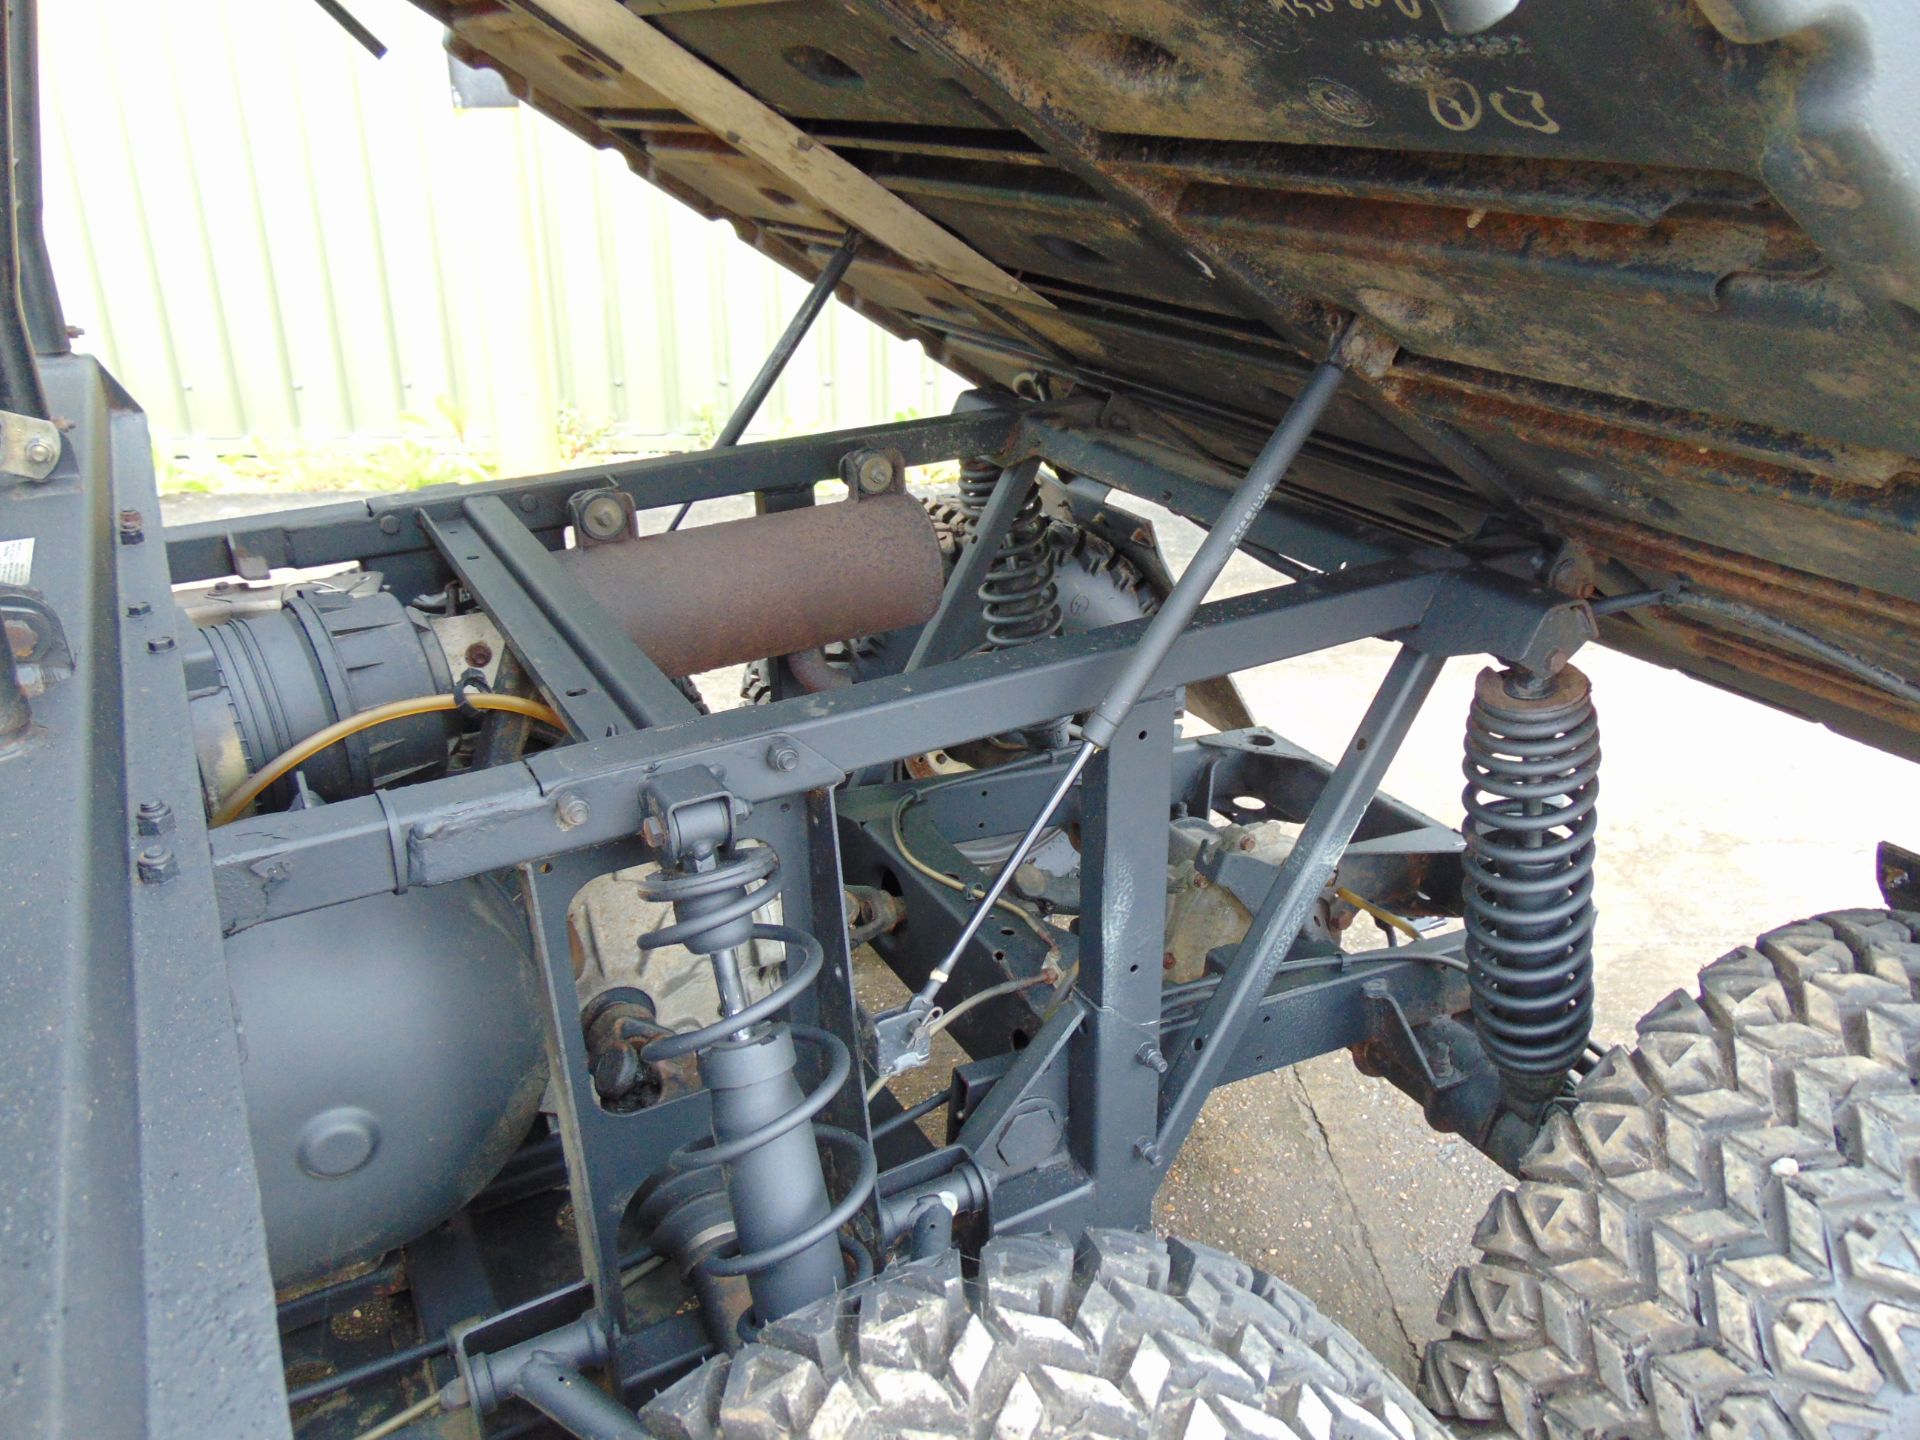 Polaris Ranger 6 x 6 Off-Road Utility Vehicle - Petrol Engine 555 hours Rec from Nat Grid - Image 19 of 30